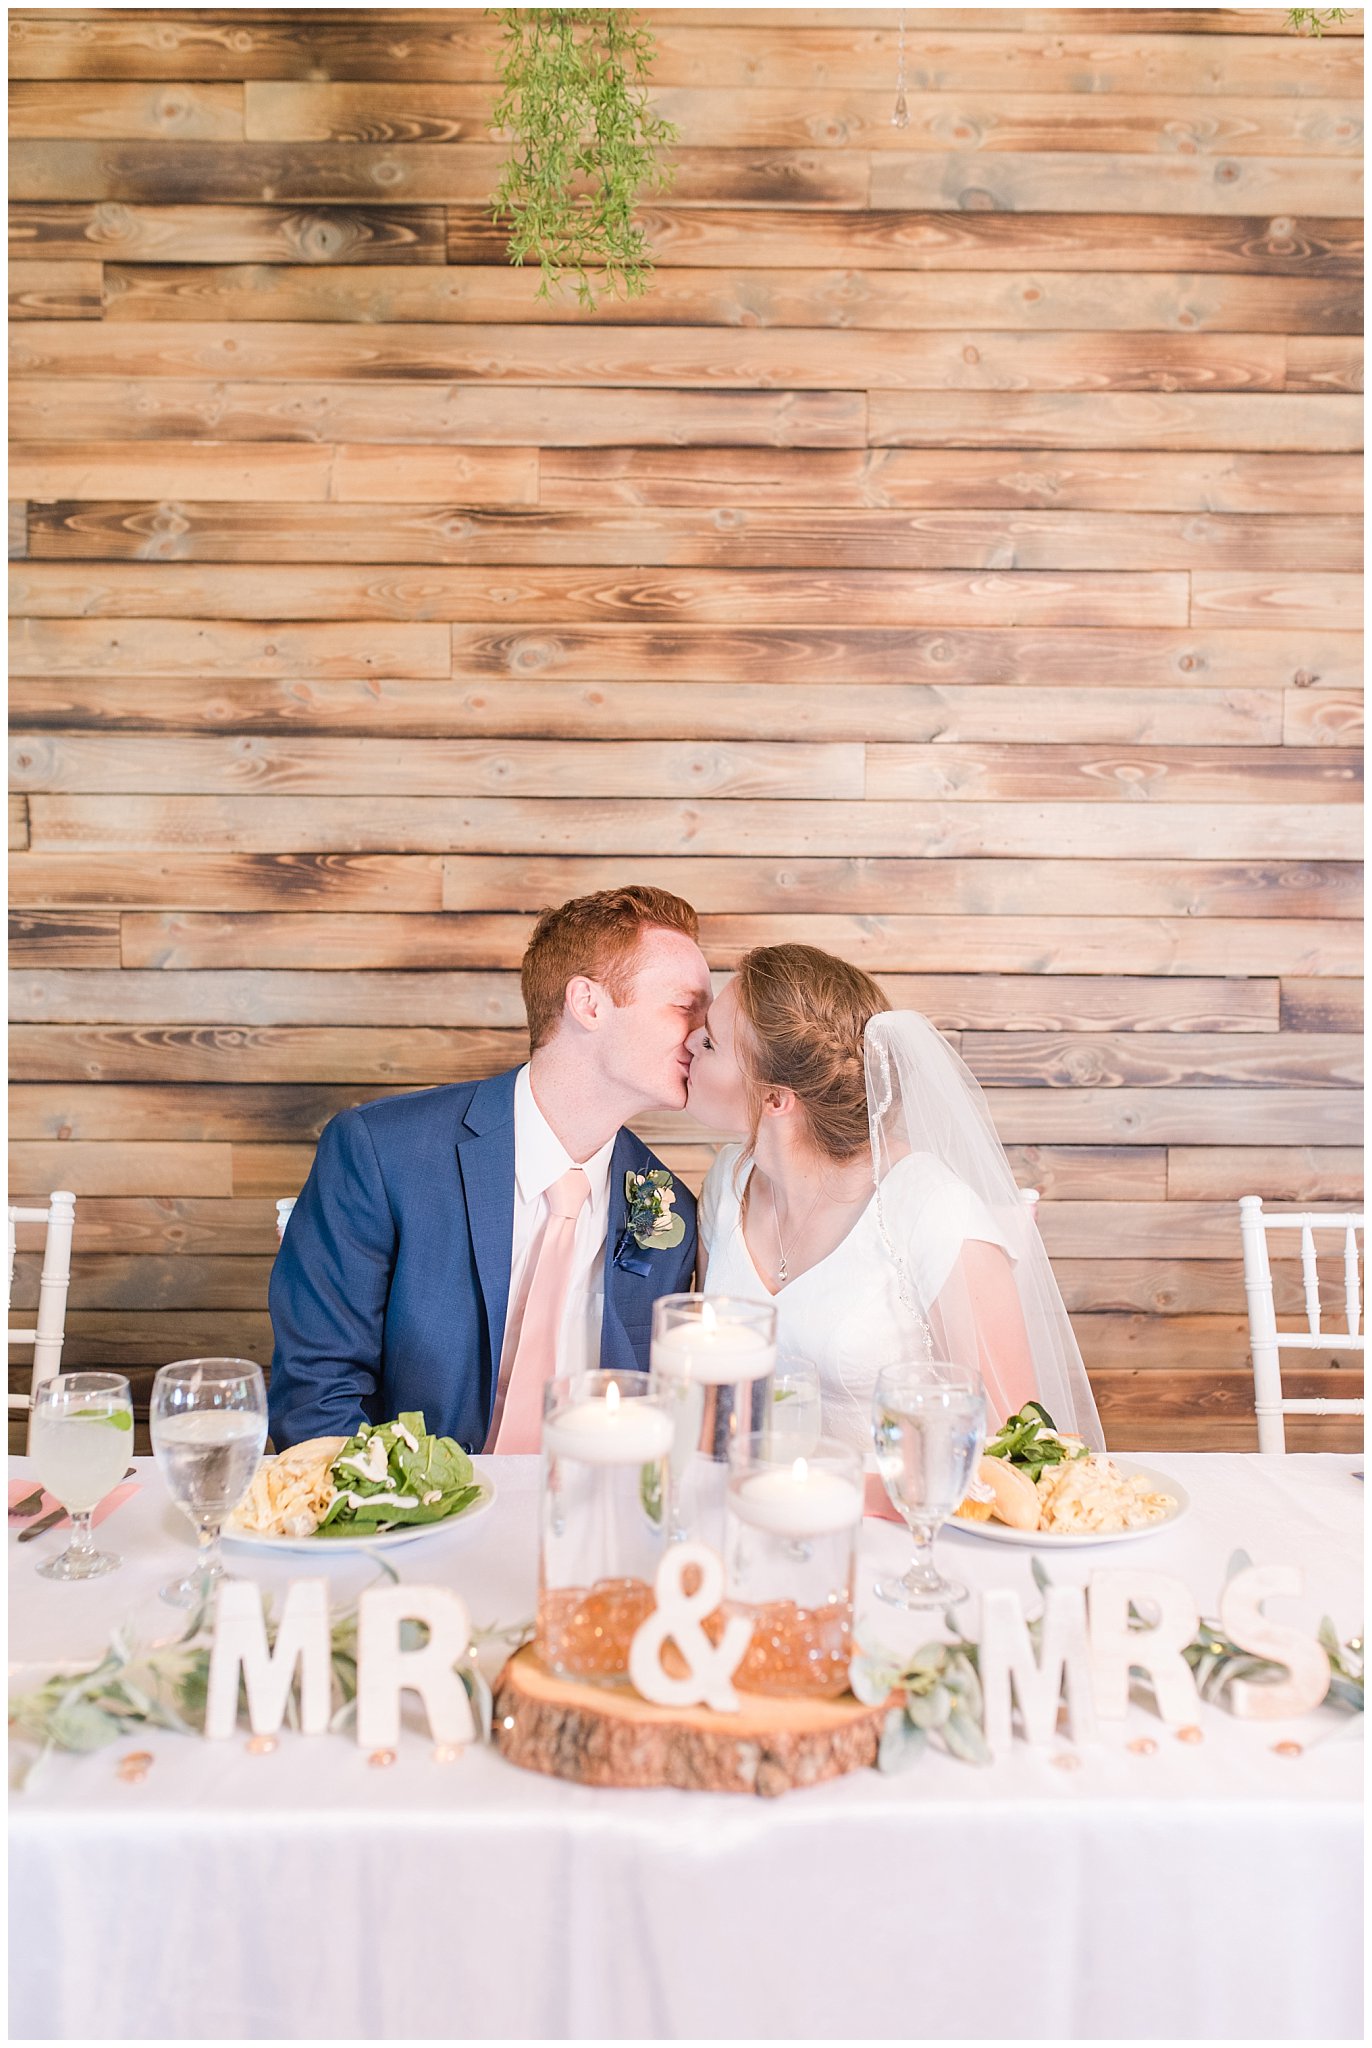 Bride and groom kiss at sweetheart table | Oak Hills Reception and Events Center | Jessie and Dallin Photography